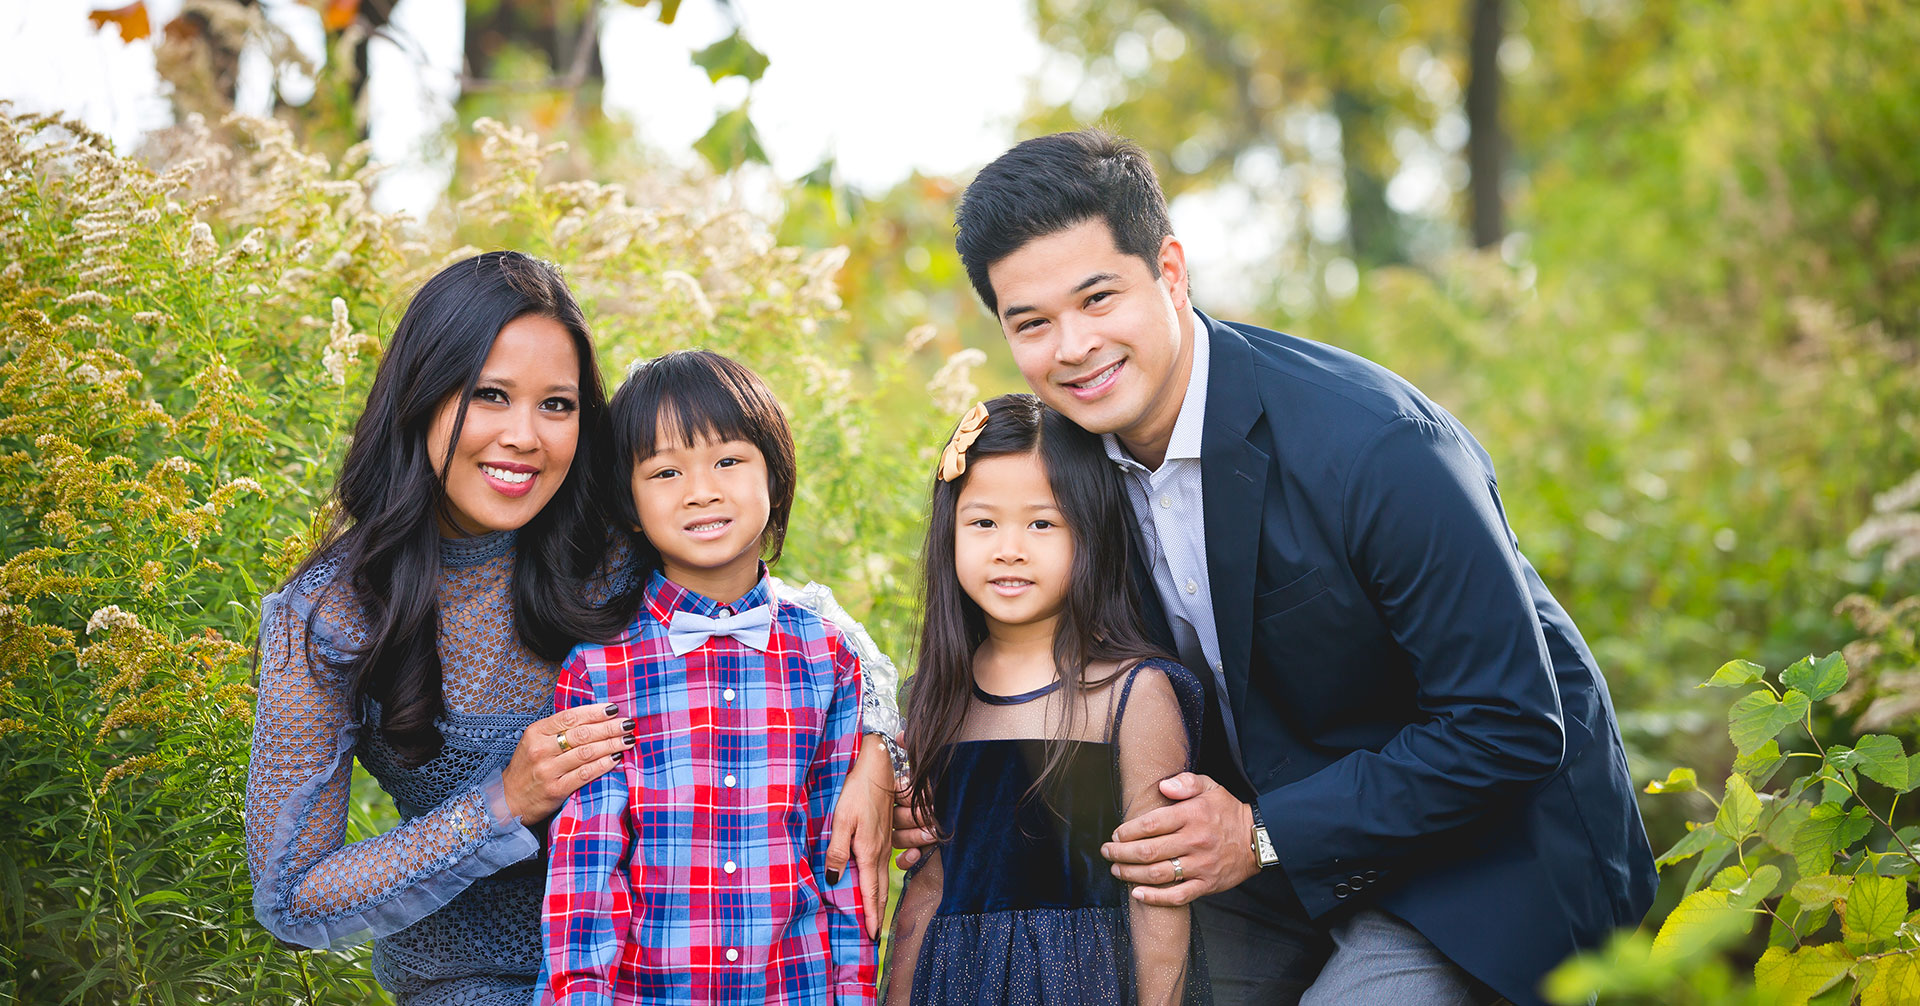 Drs. Mendiola and Navarro from Pebblewood Dental and their children